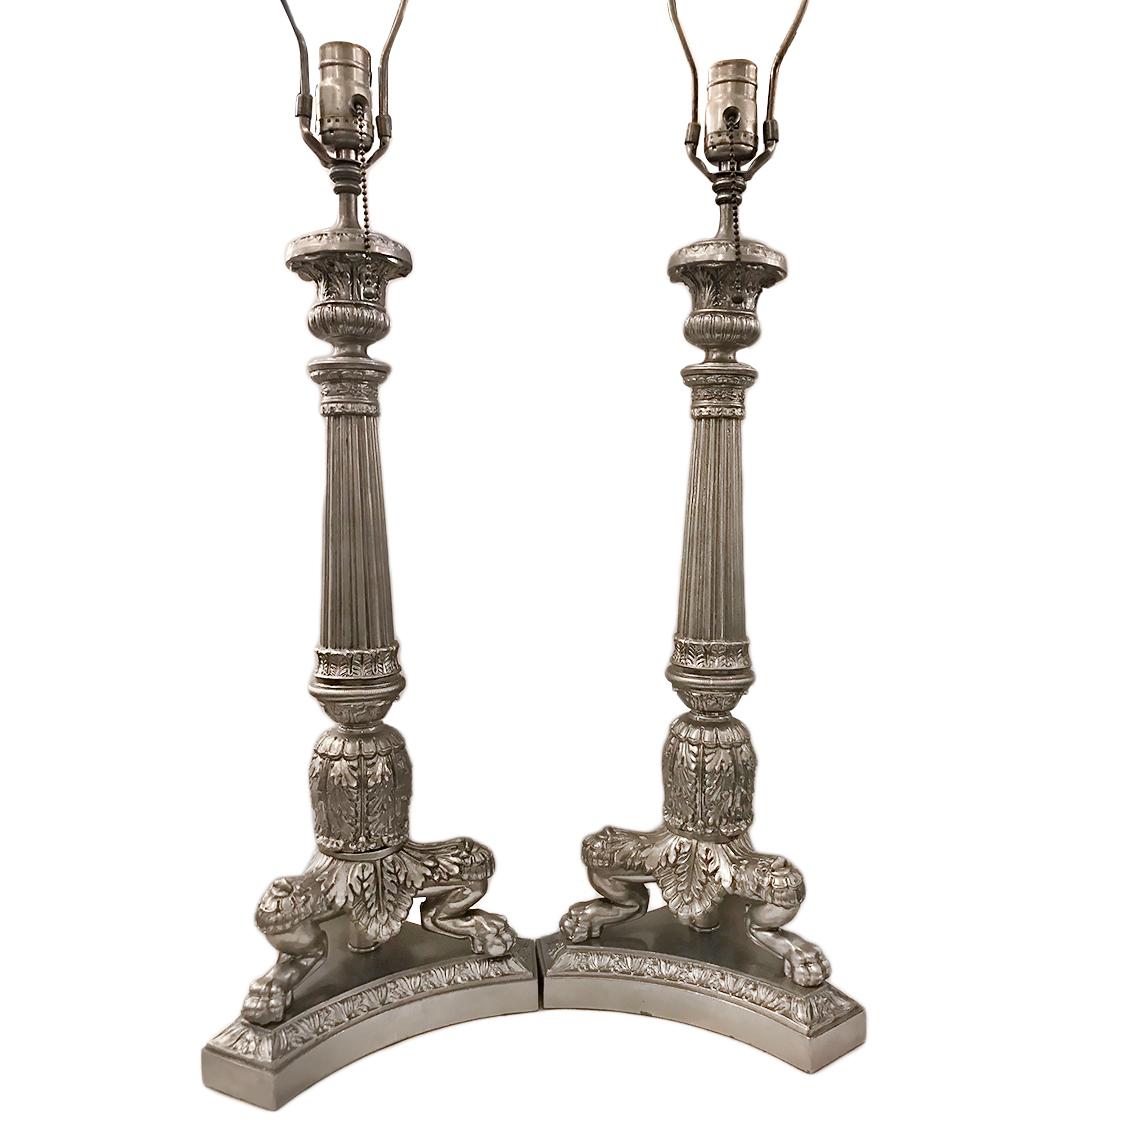 A pair of circa 1930s French nickel-plated three-footed candlesticks wired as lamps with intricate detailing in the Empire style.

Measurements:
Height of body: 20